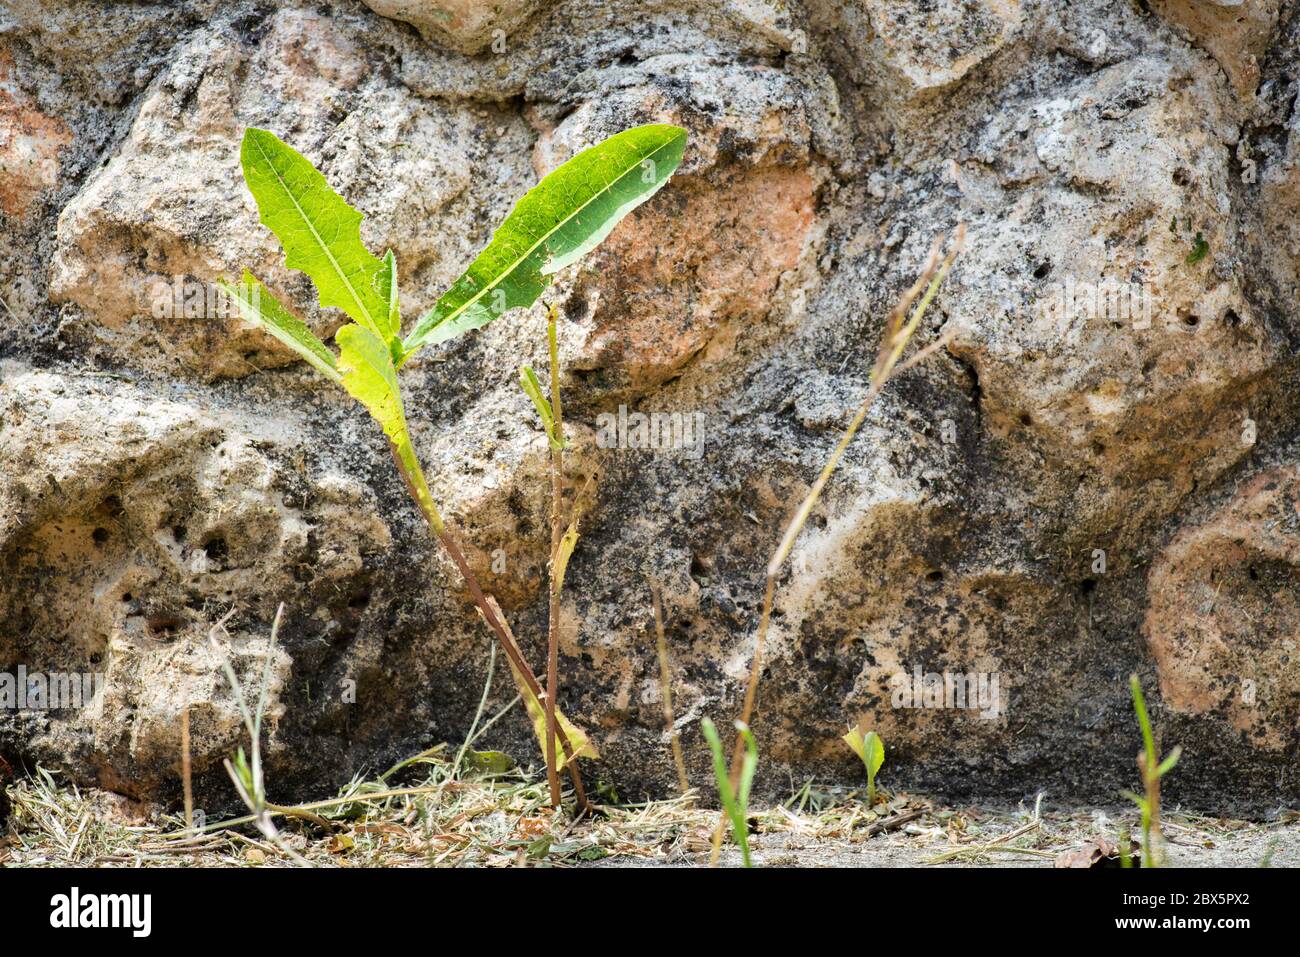 resilient plant growing between the cracks in the asphalt, concept Stock Photo